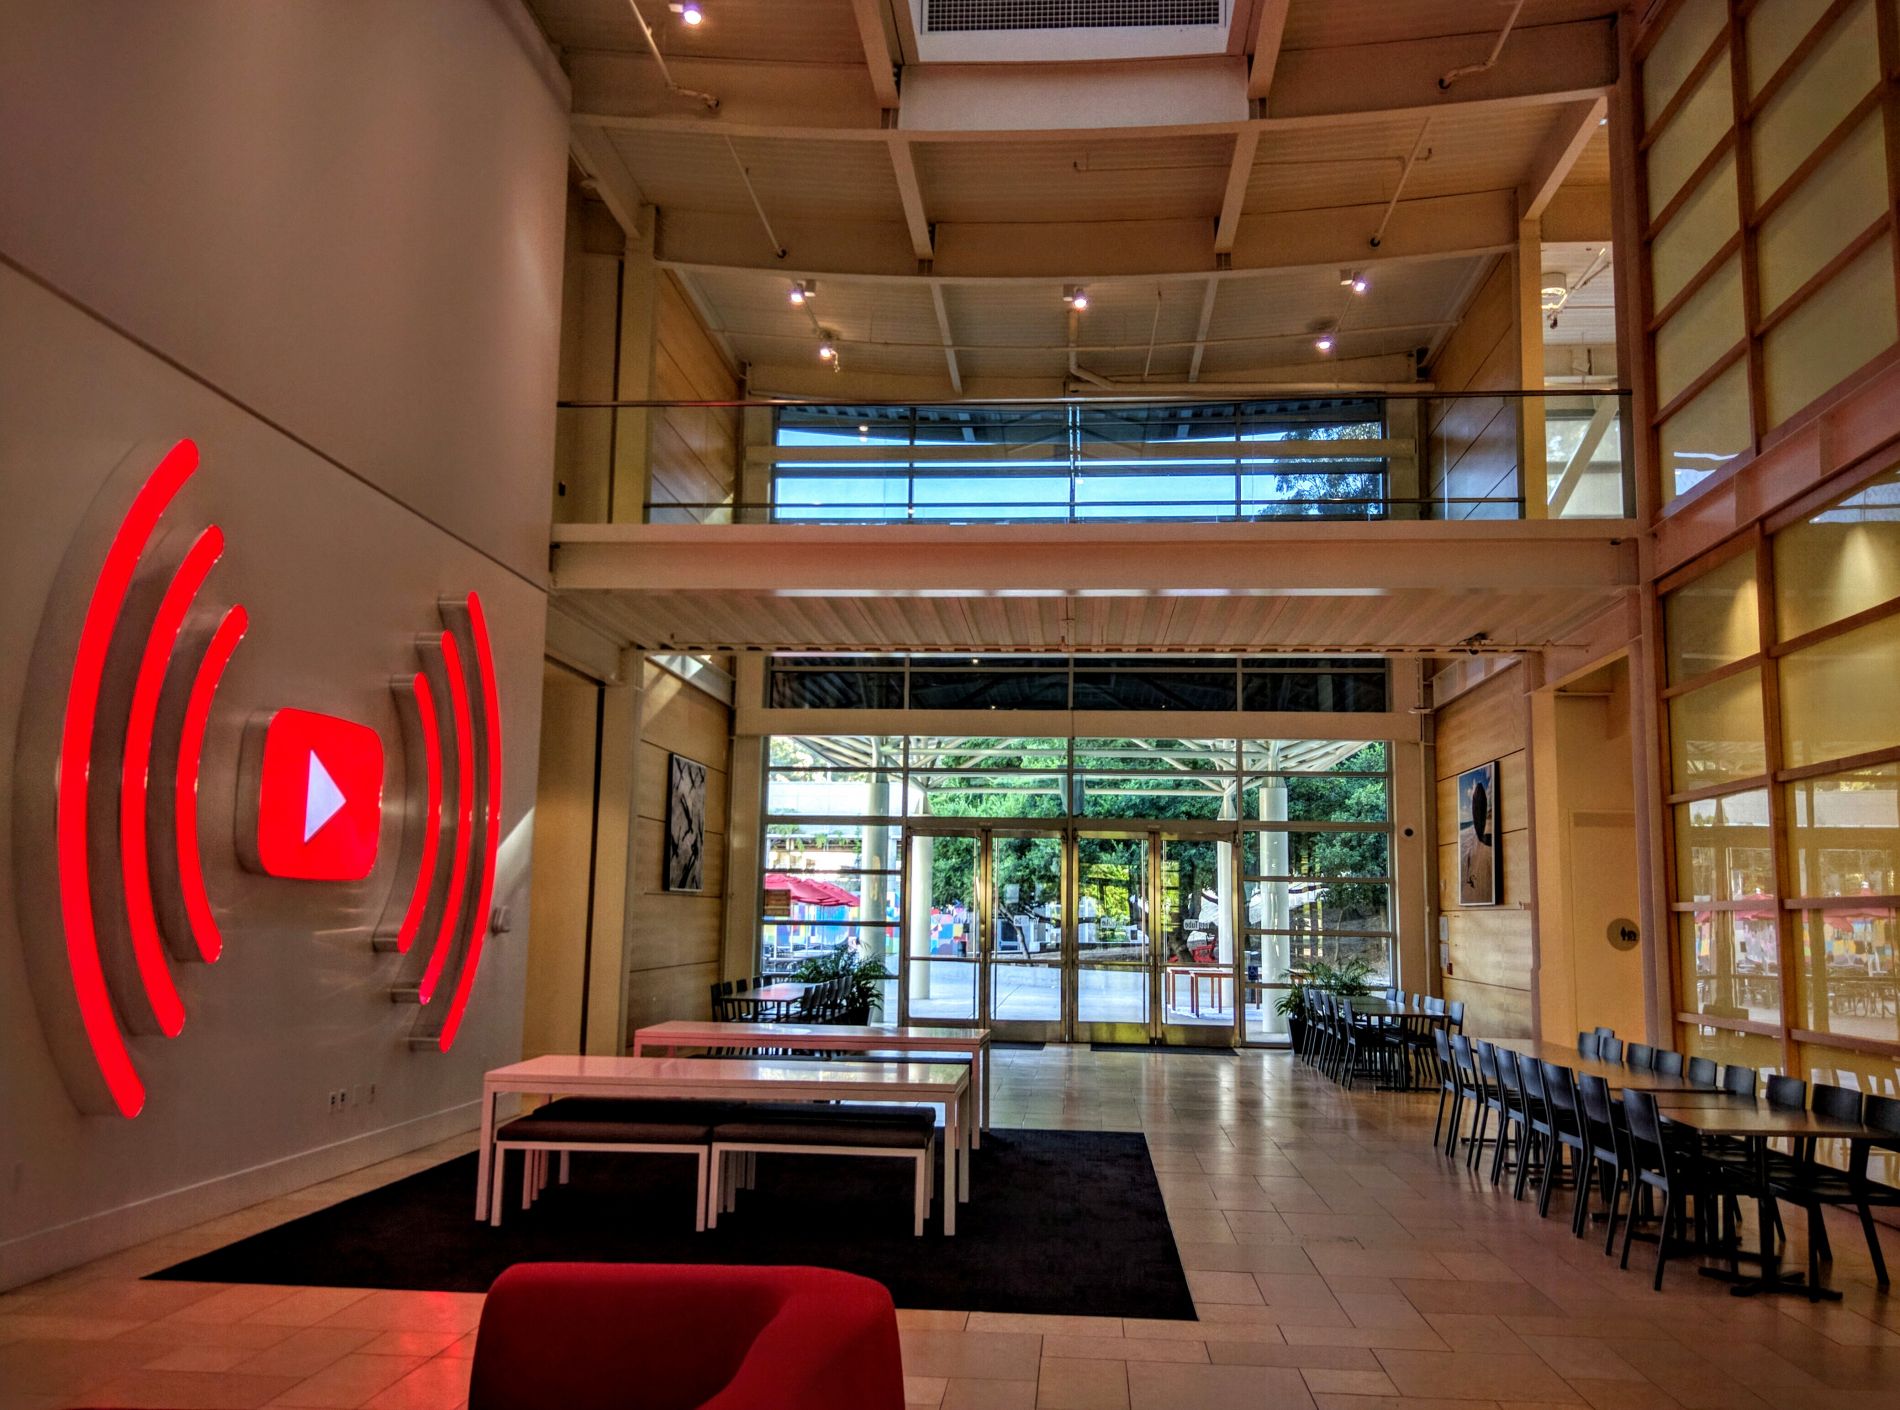 YouTube HQ by Travis Wise